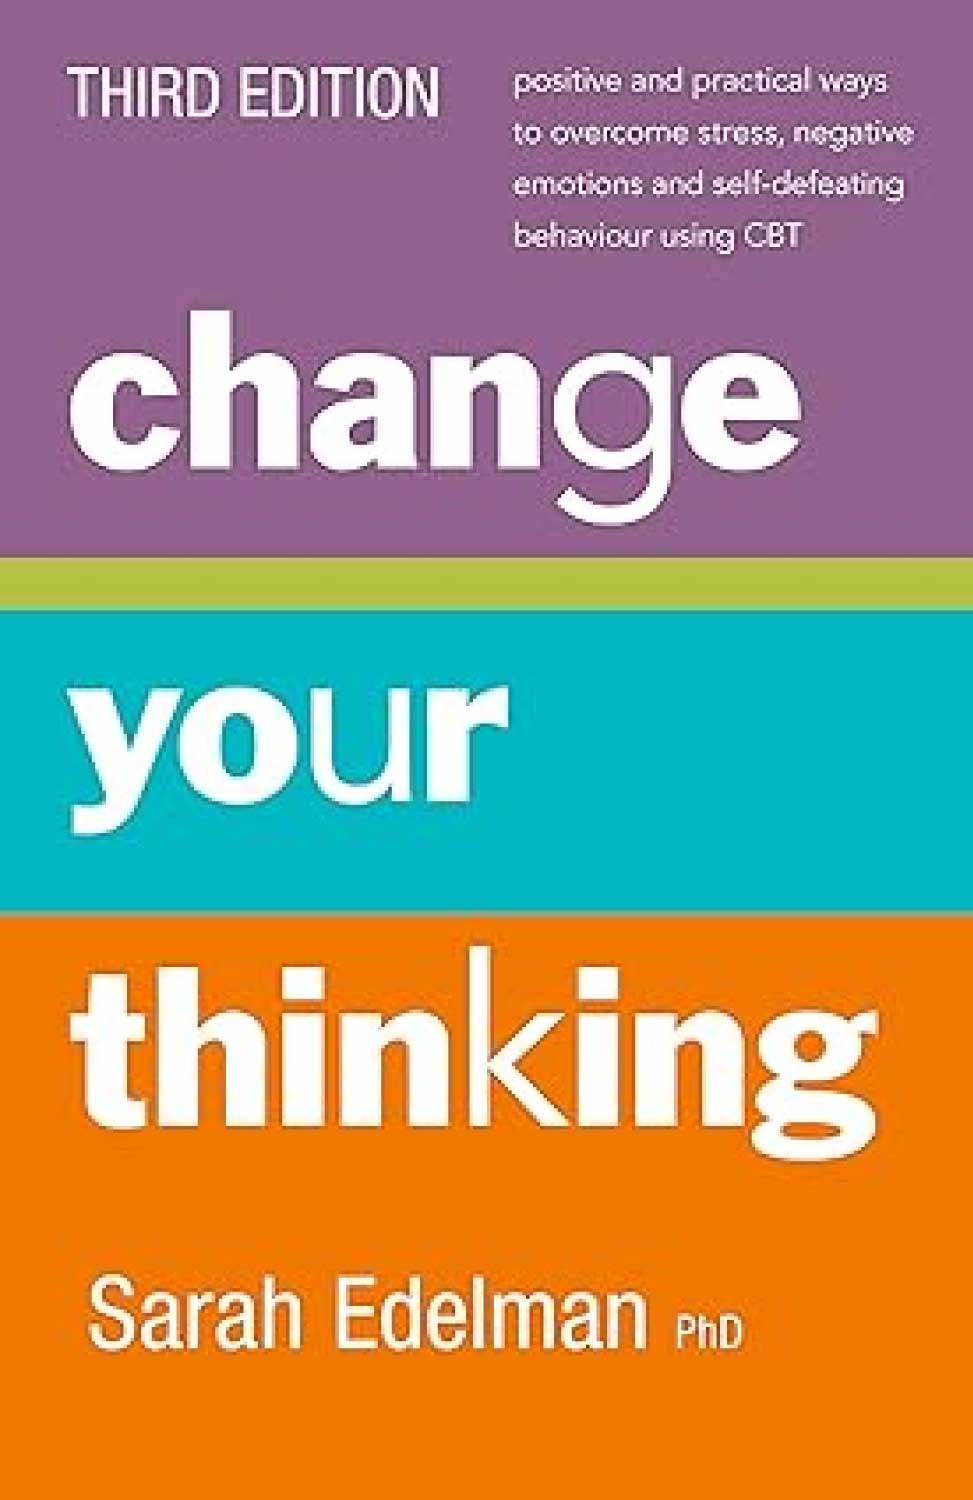 Book cover photo for Change Your Thinking